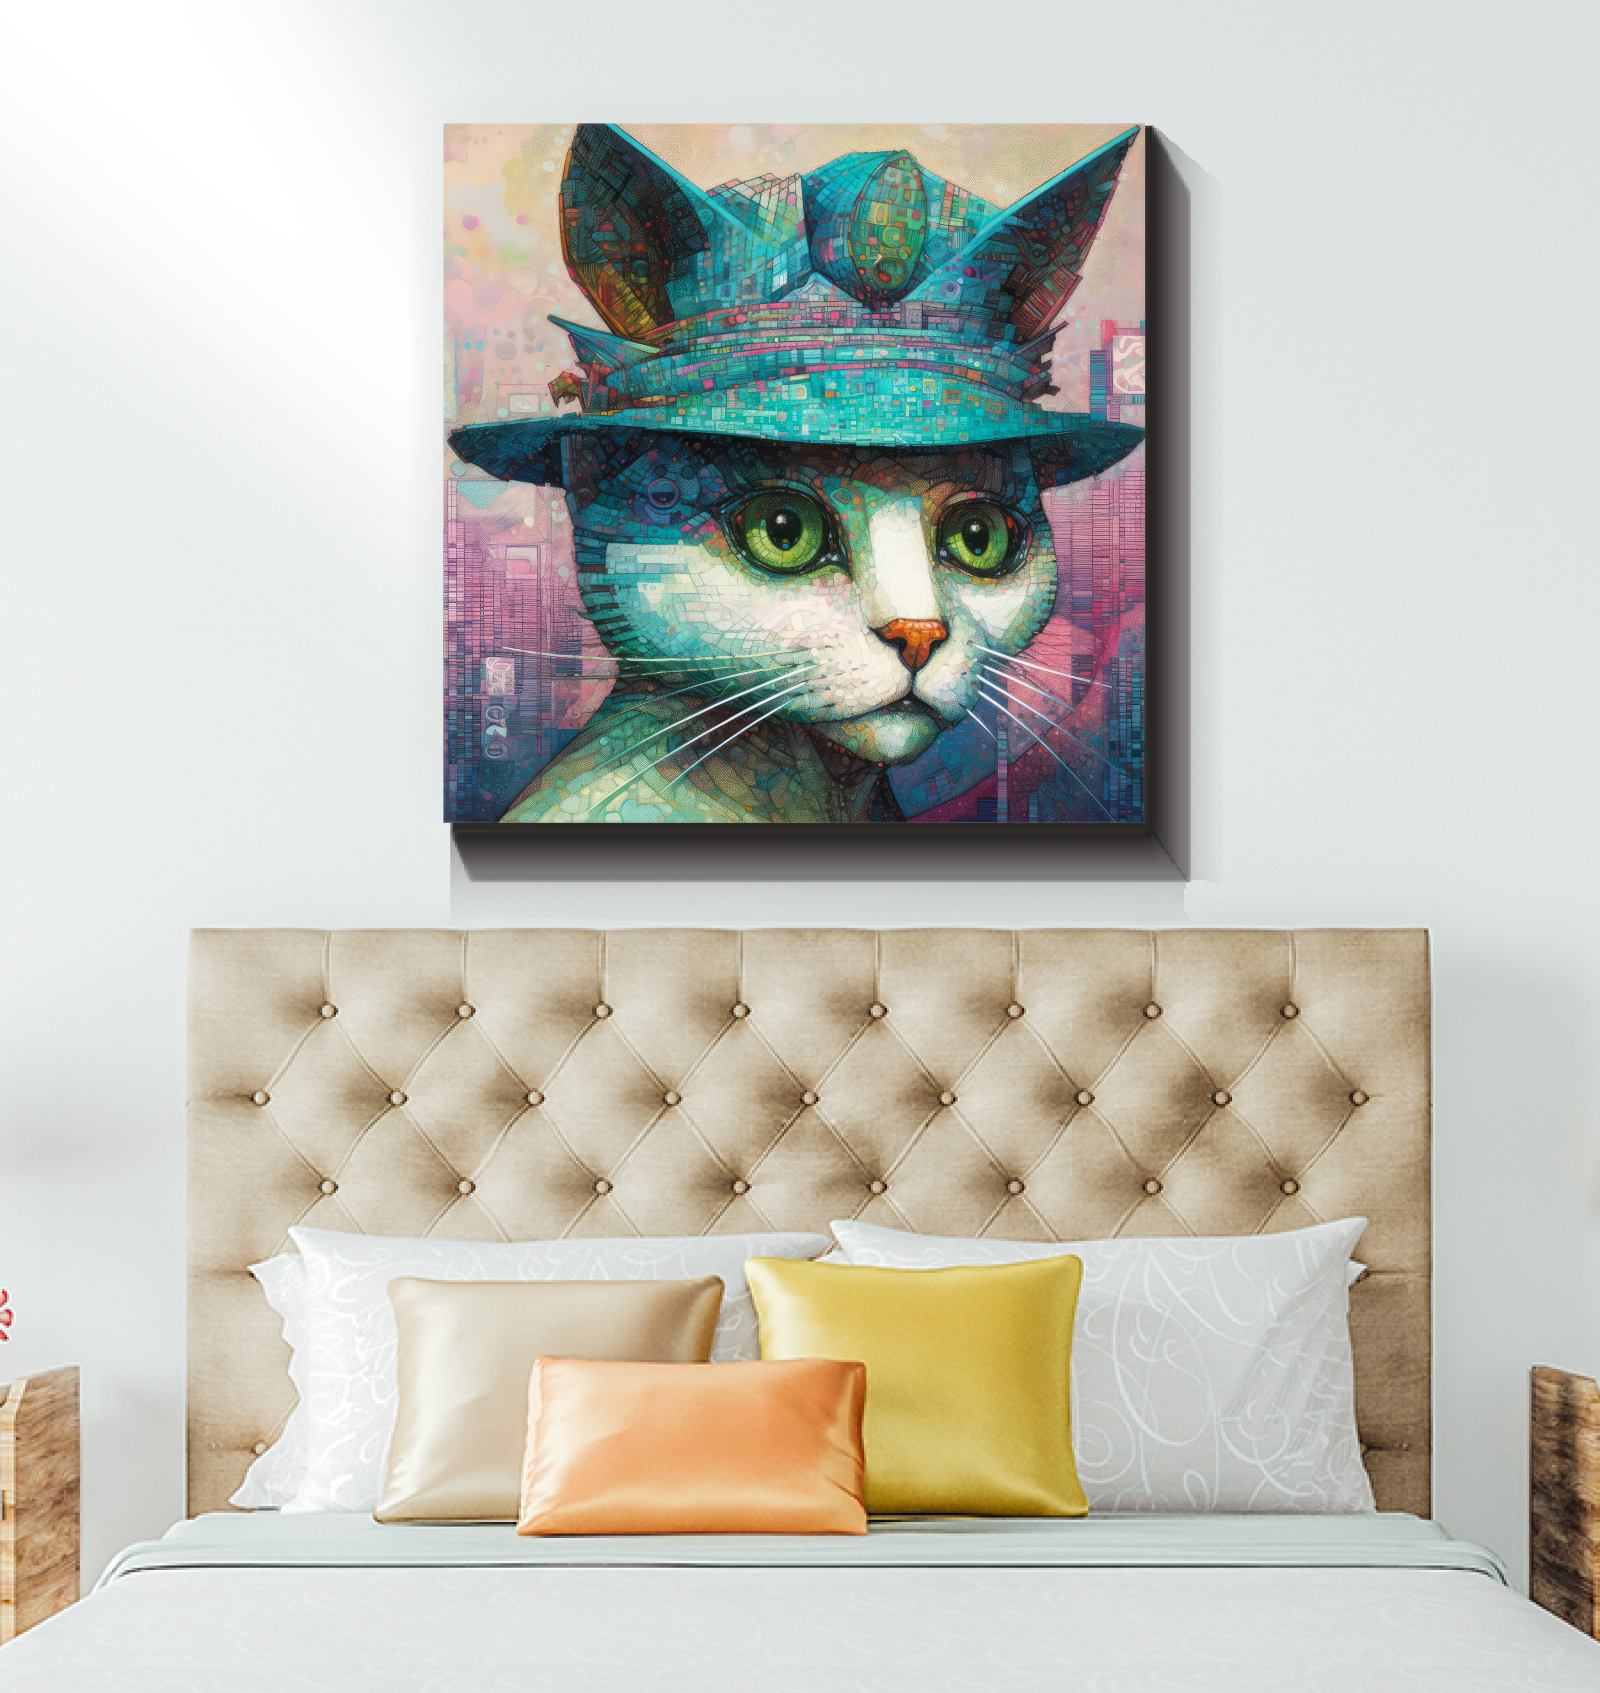 Timeless Best Friend's Canvas design for a warm home atmosphere.